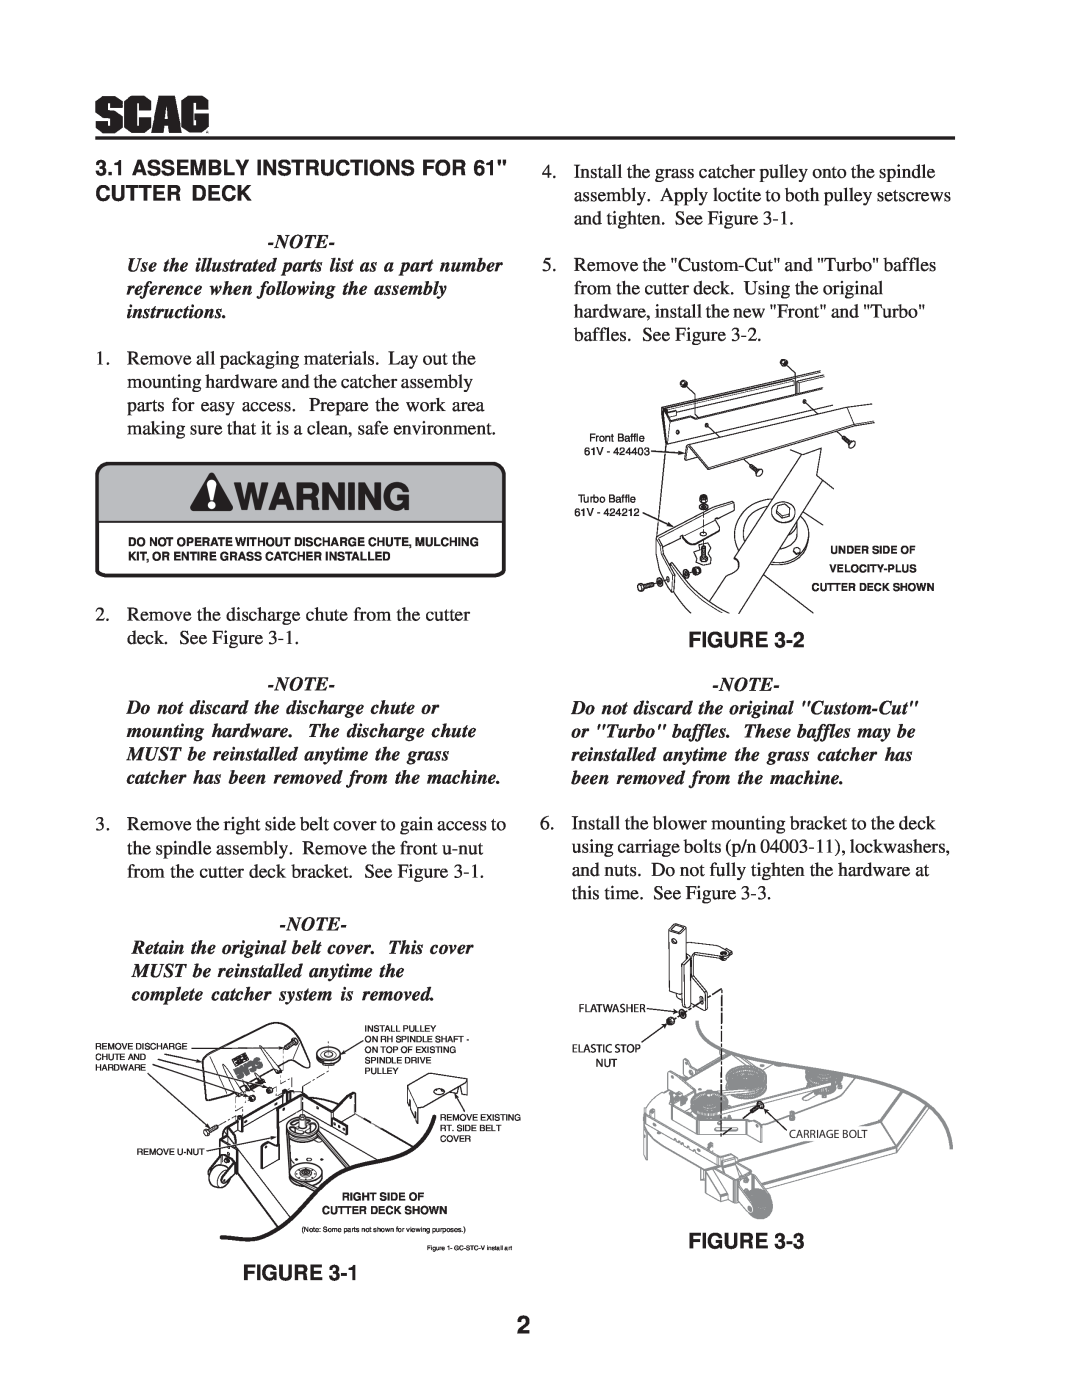 Scag Power Equipment GC-STWC-61V operating instructions ASSEMBLY INSTRUCTIONS FOR 61 CUTTER DECK 